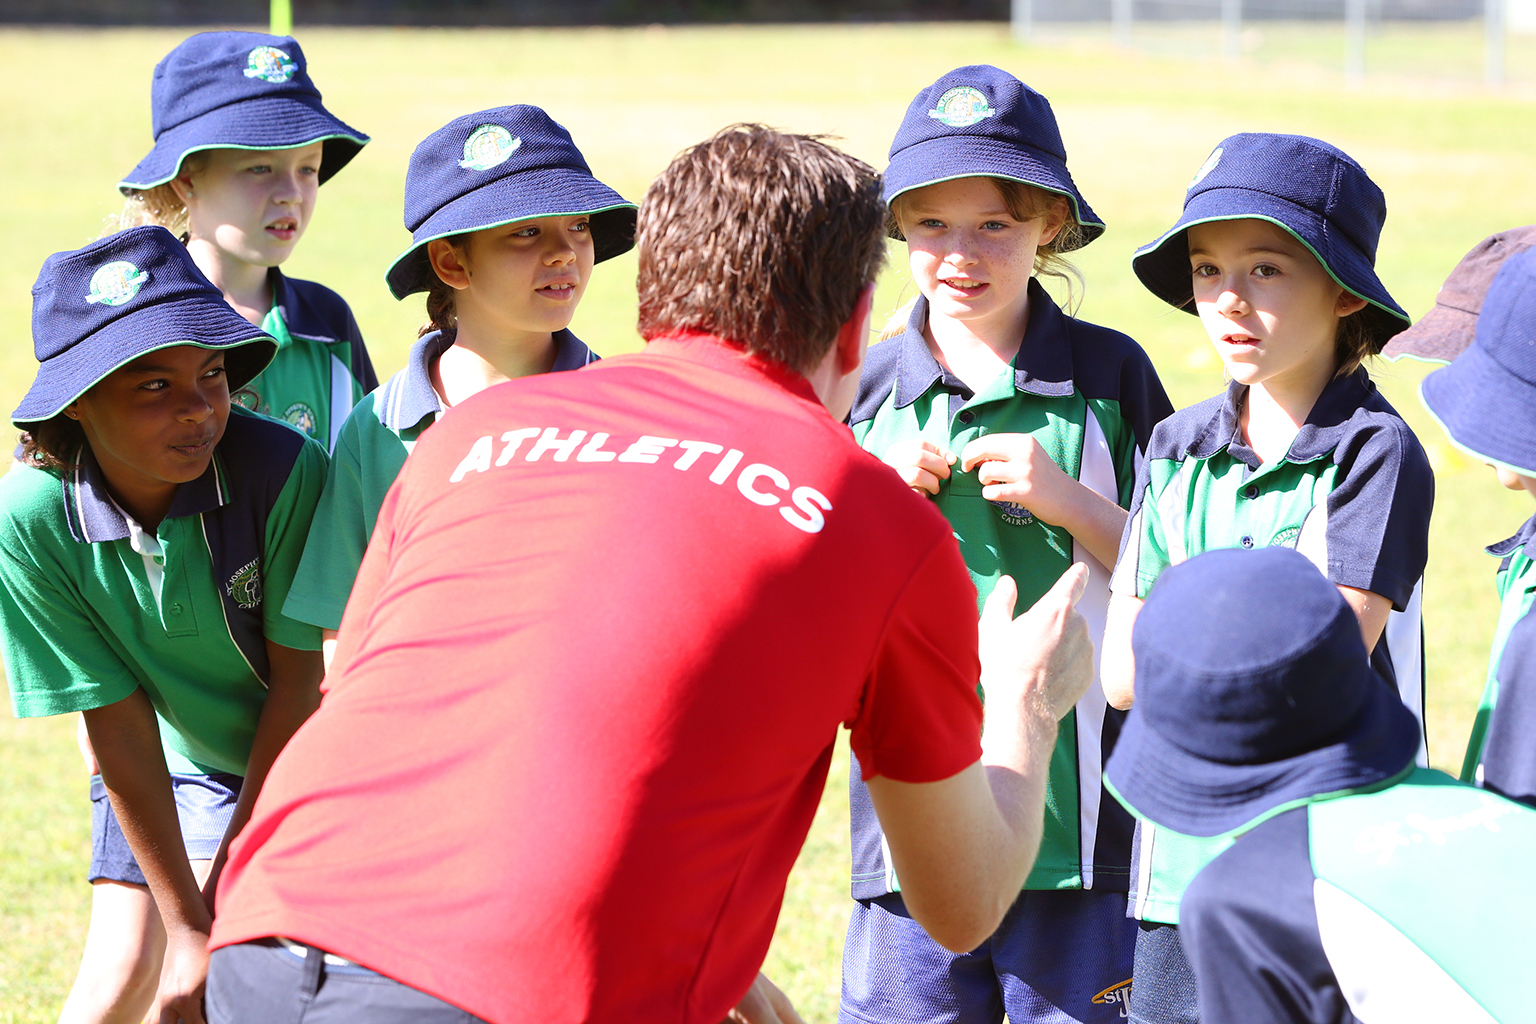 A man wearing a shirt with the word 'athletics' across the back speaks to school children.